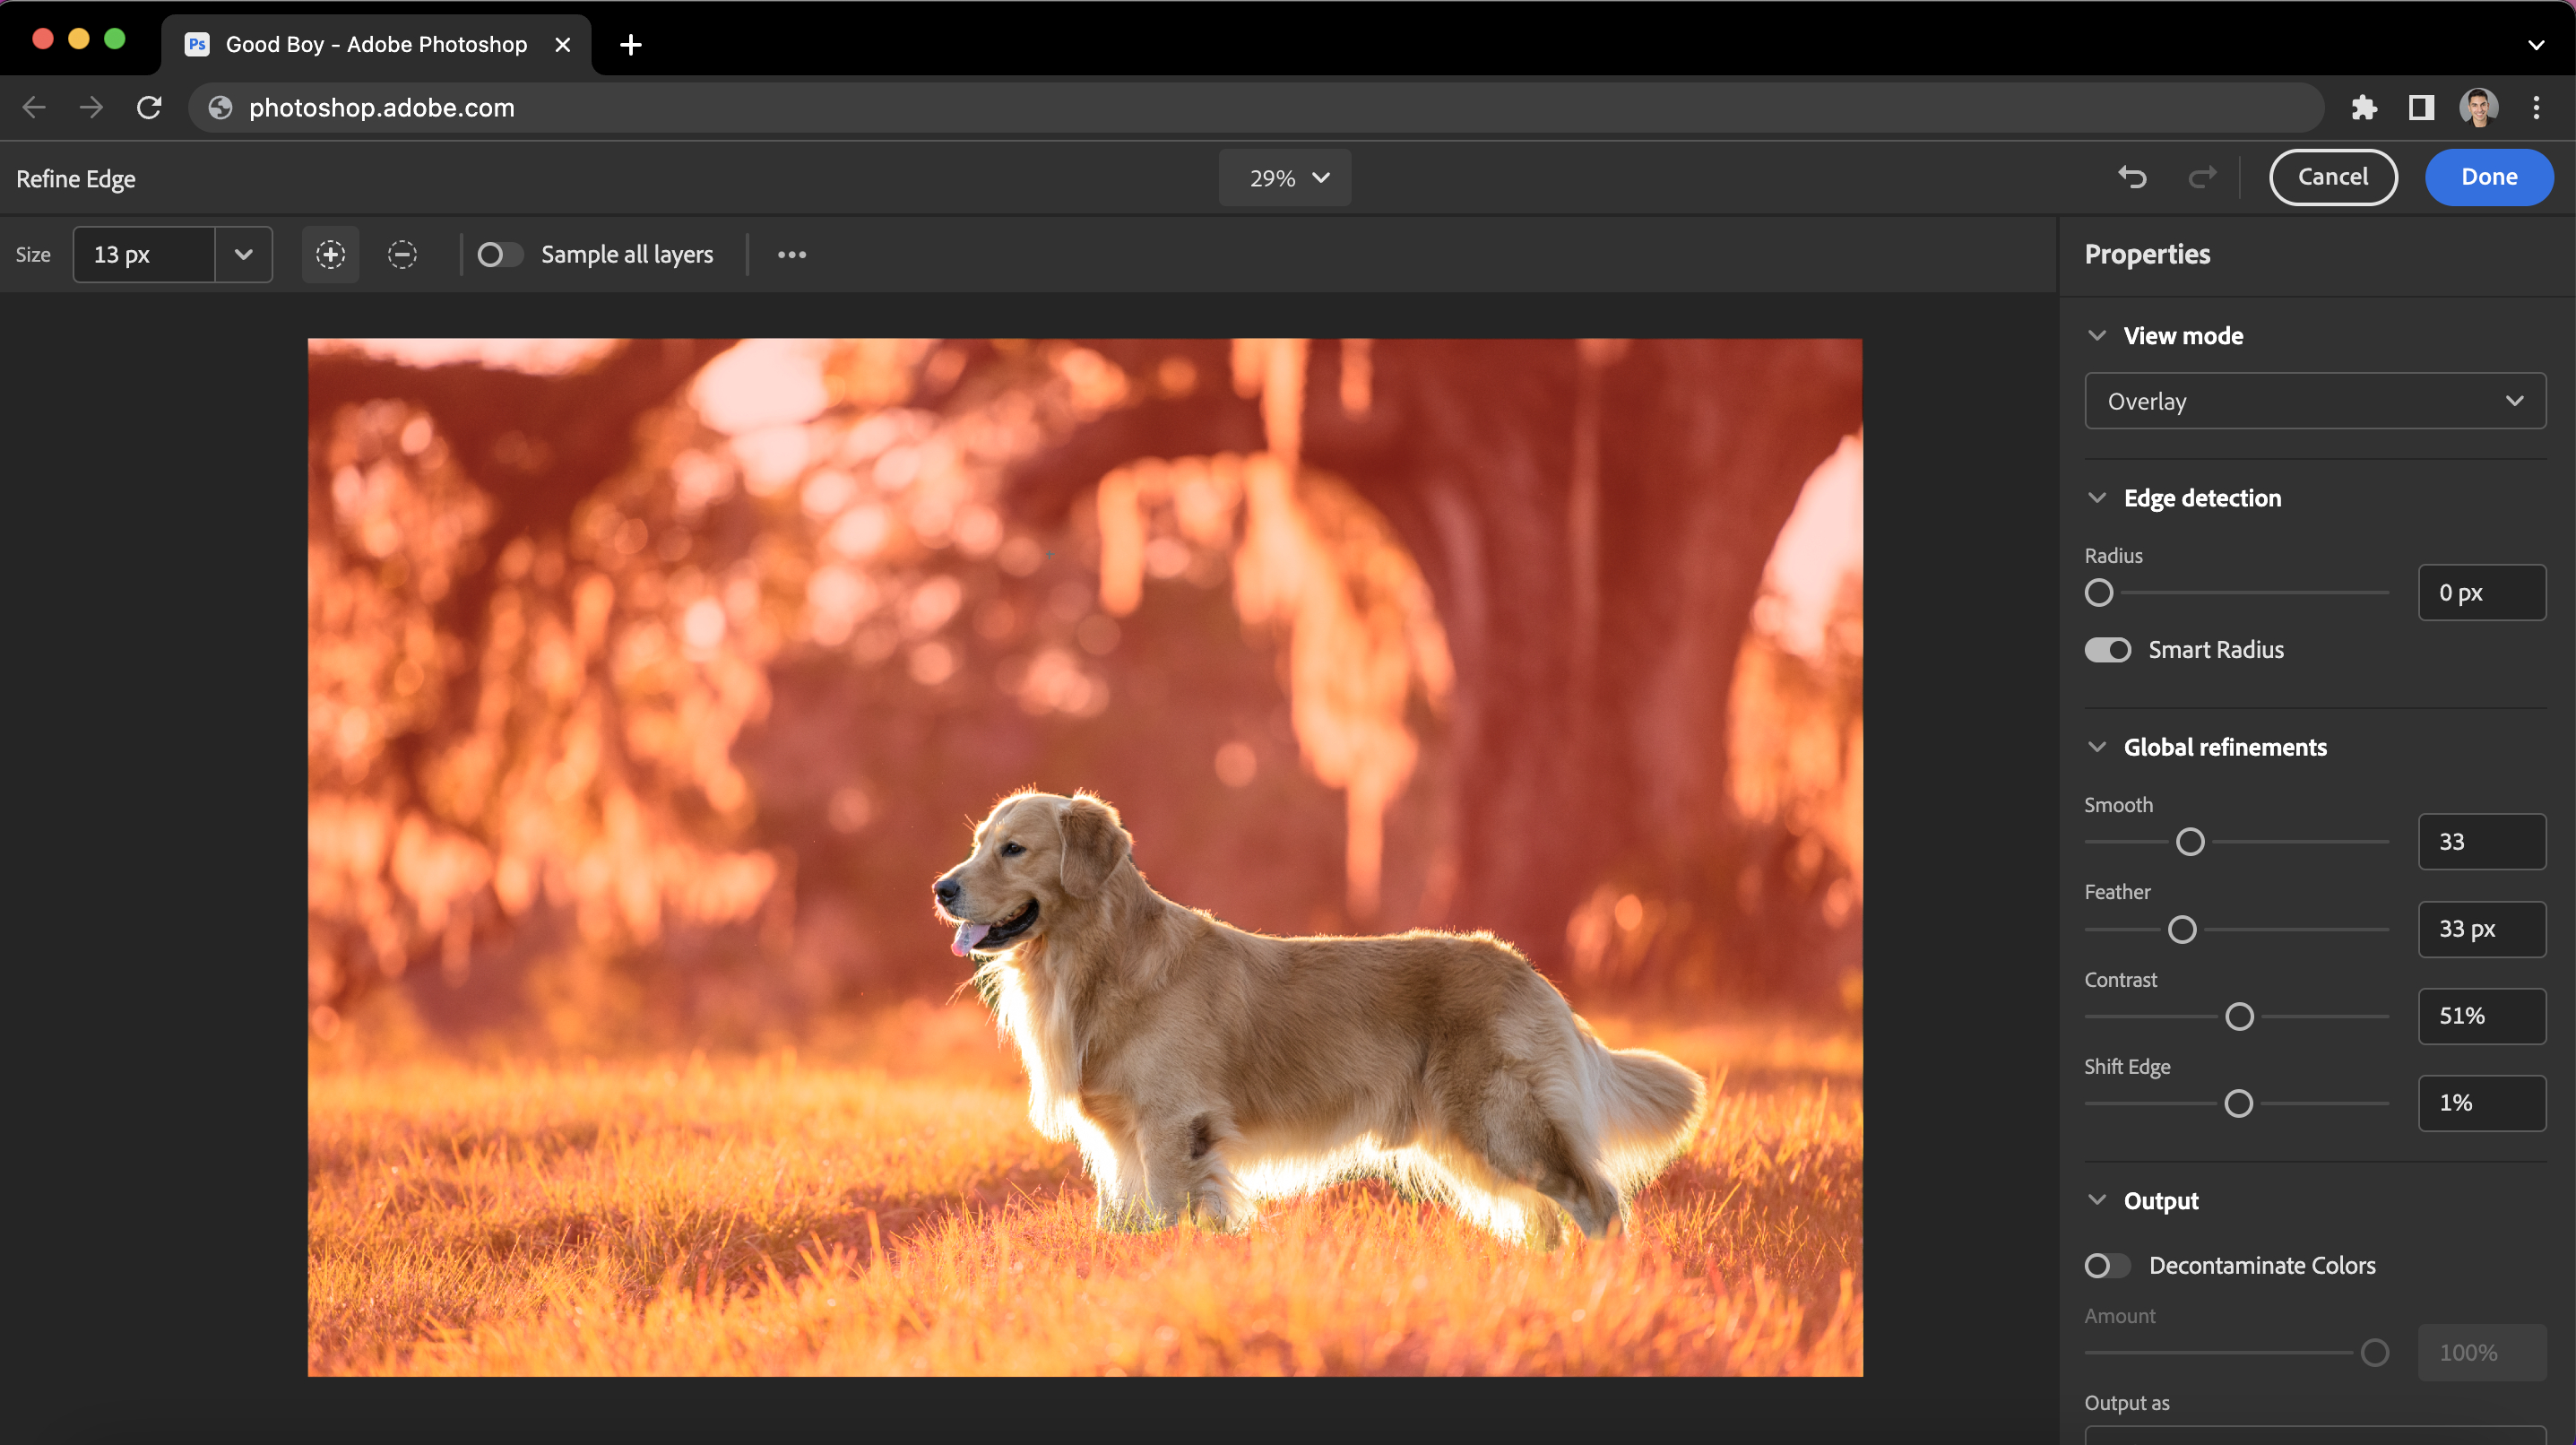 The Refine Edge feature is showcased in this browser screenshot of the web version of Photoshop, provided by Adobe